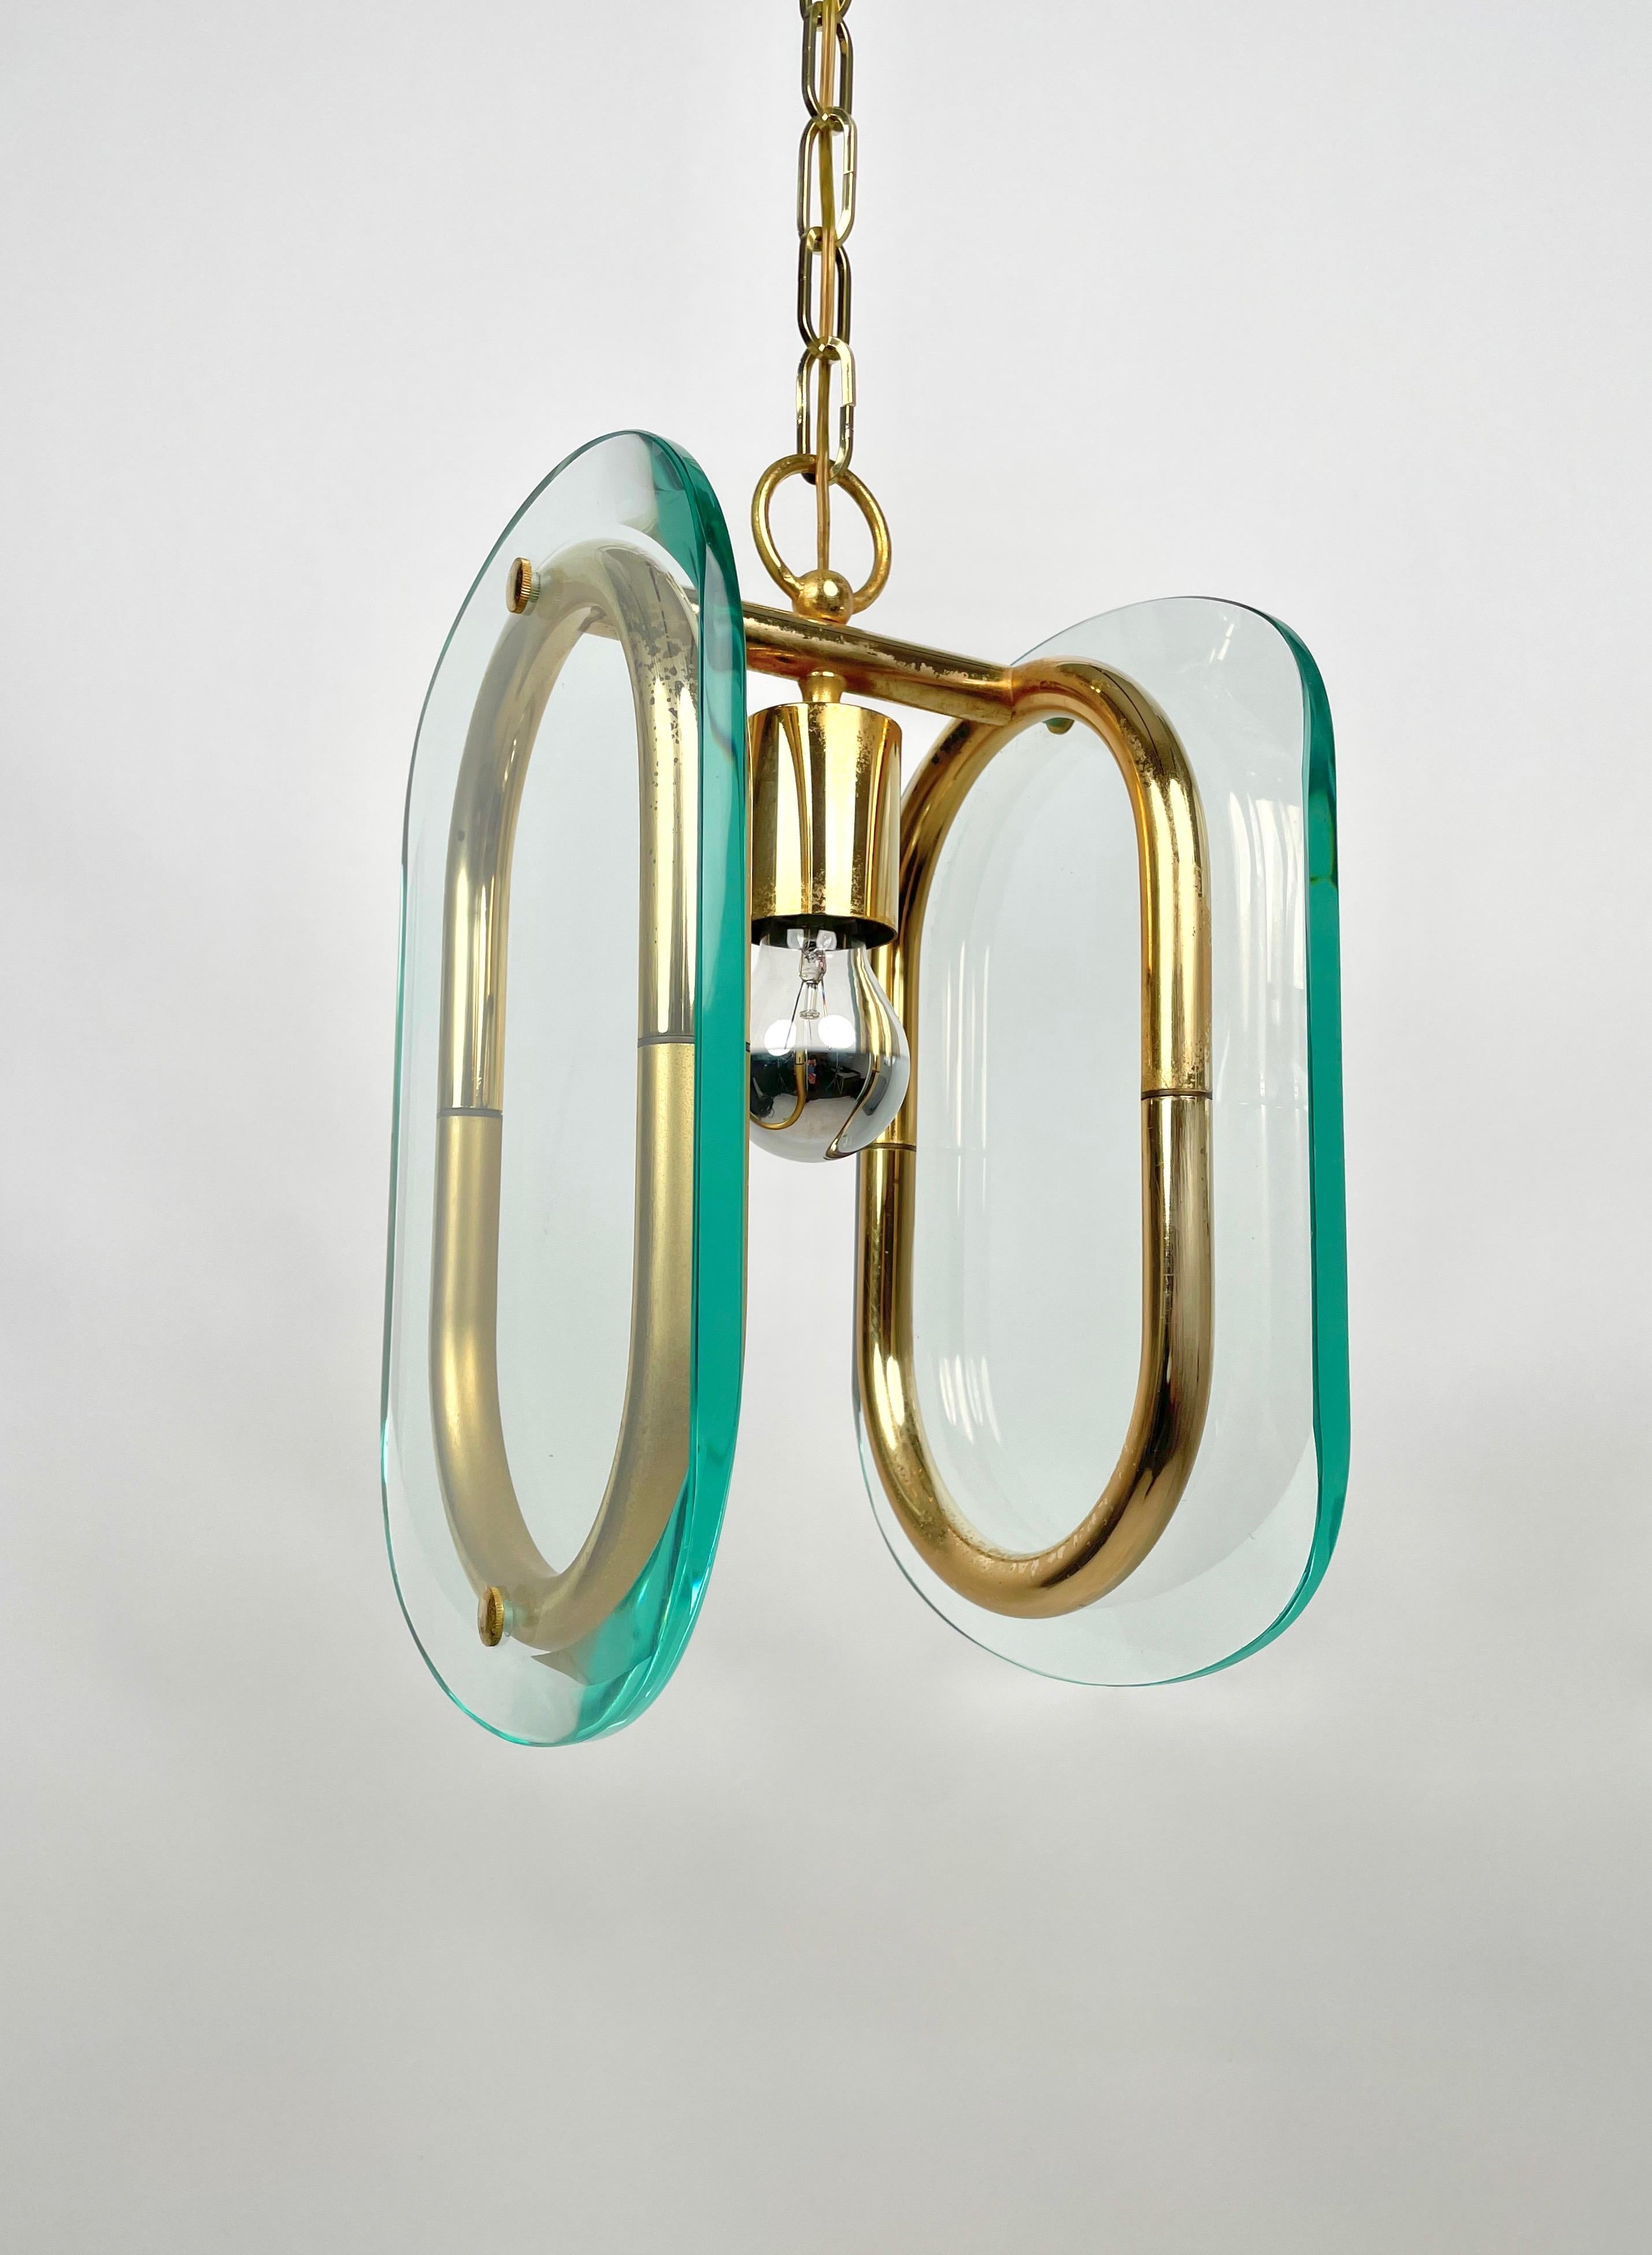 Brass and Glass Chandelier Fontana Arte Style, Italy, 1970s For Sale 5